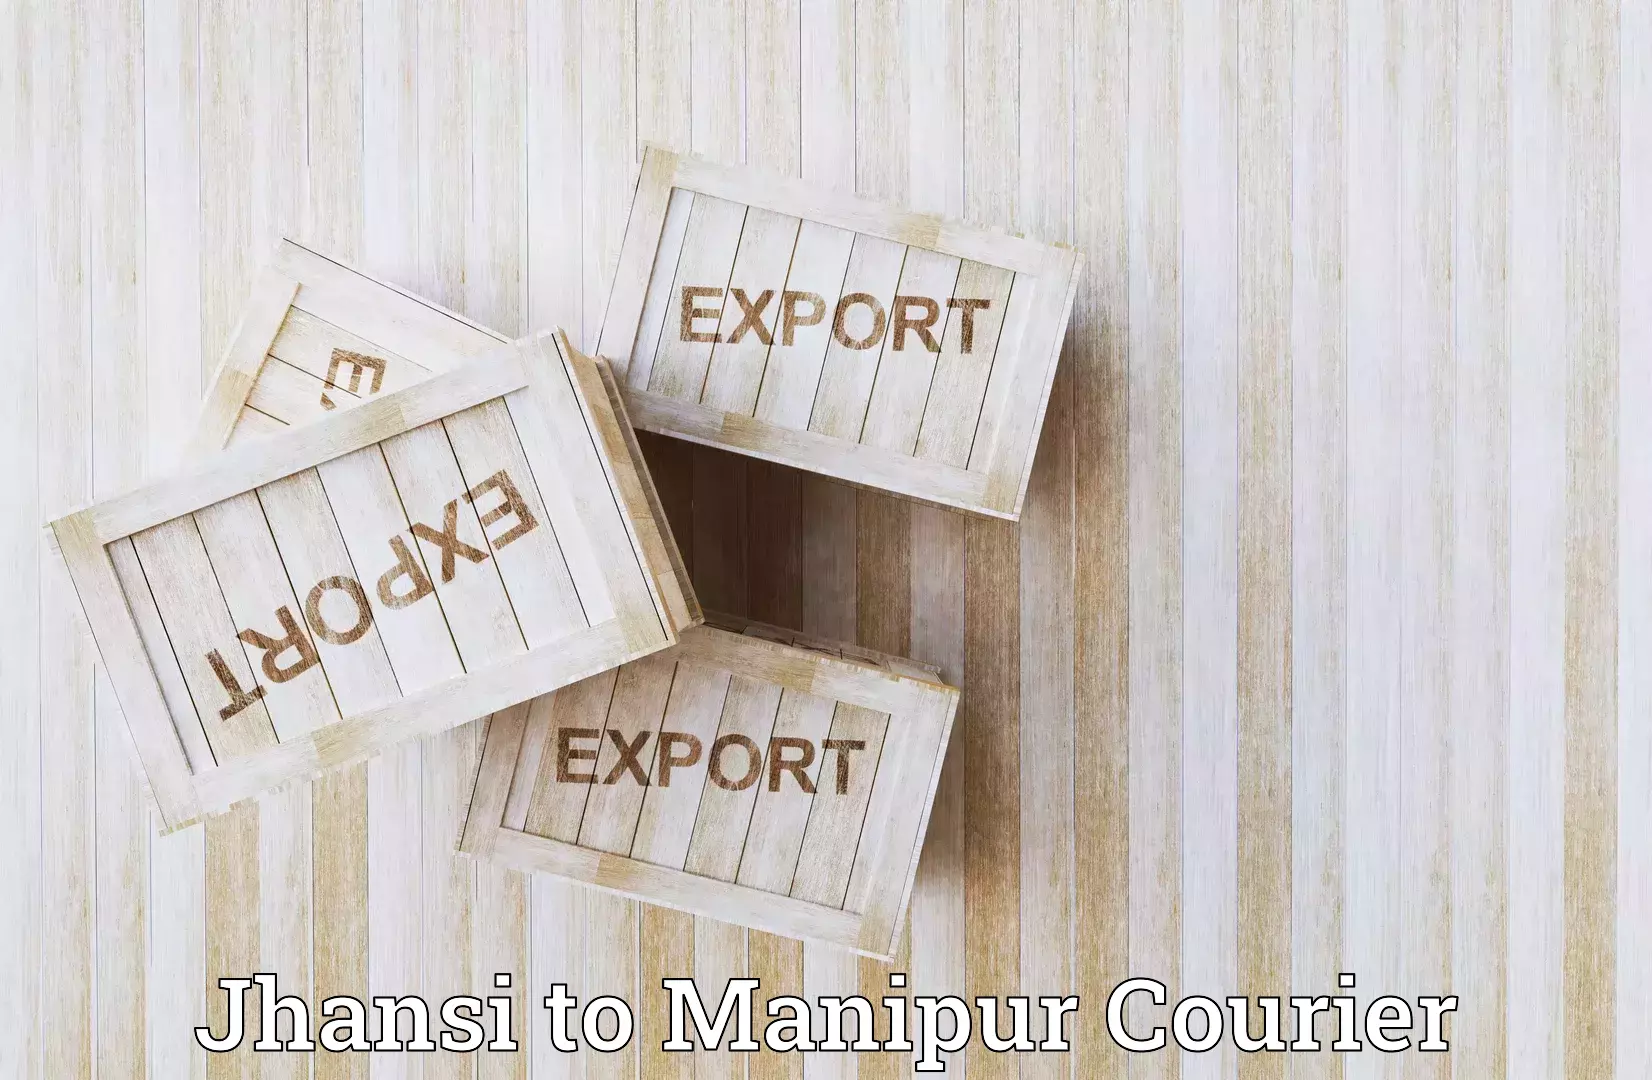 Courier service partnerships in Jhansi to Manipur